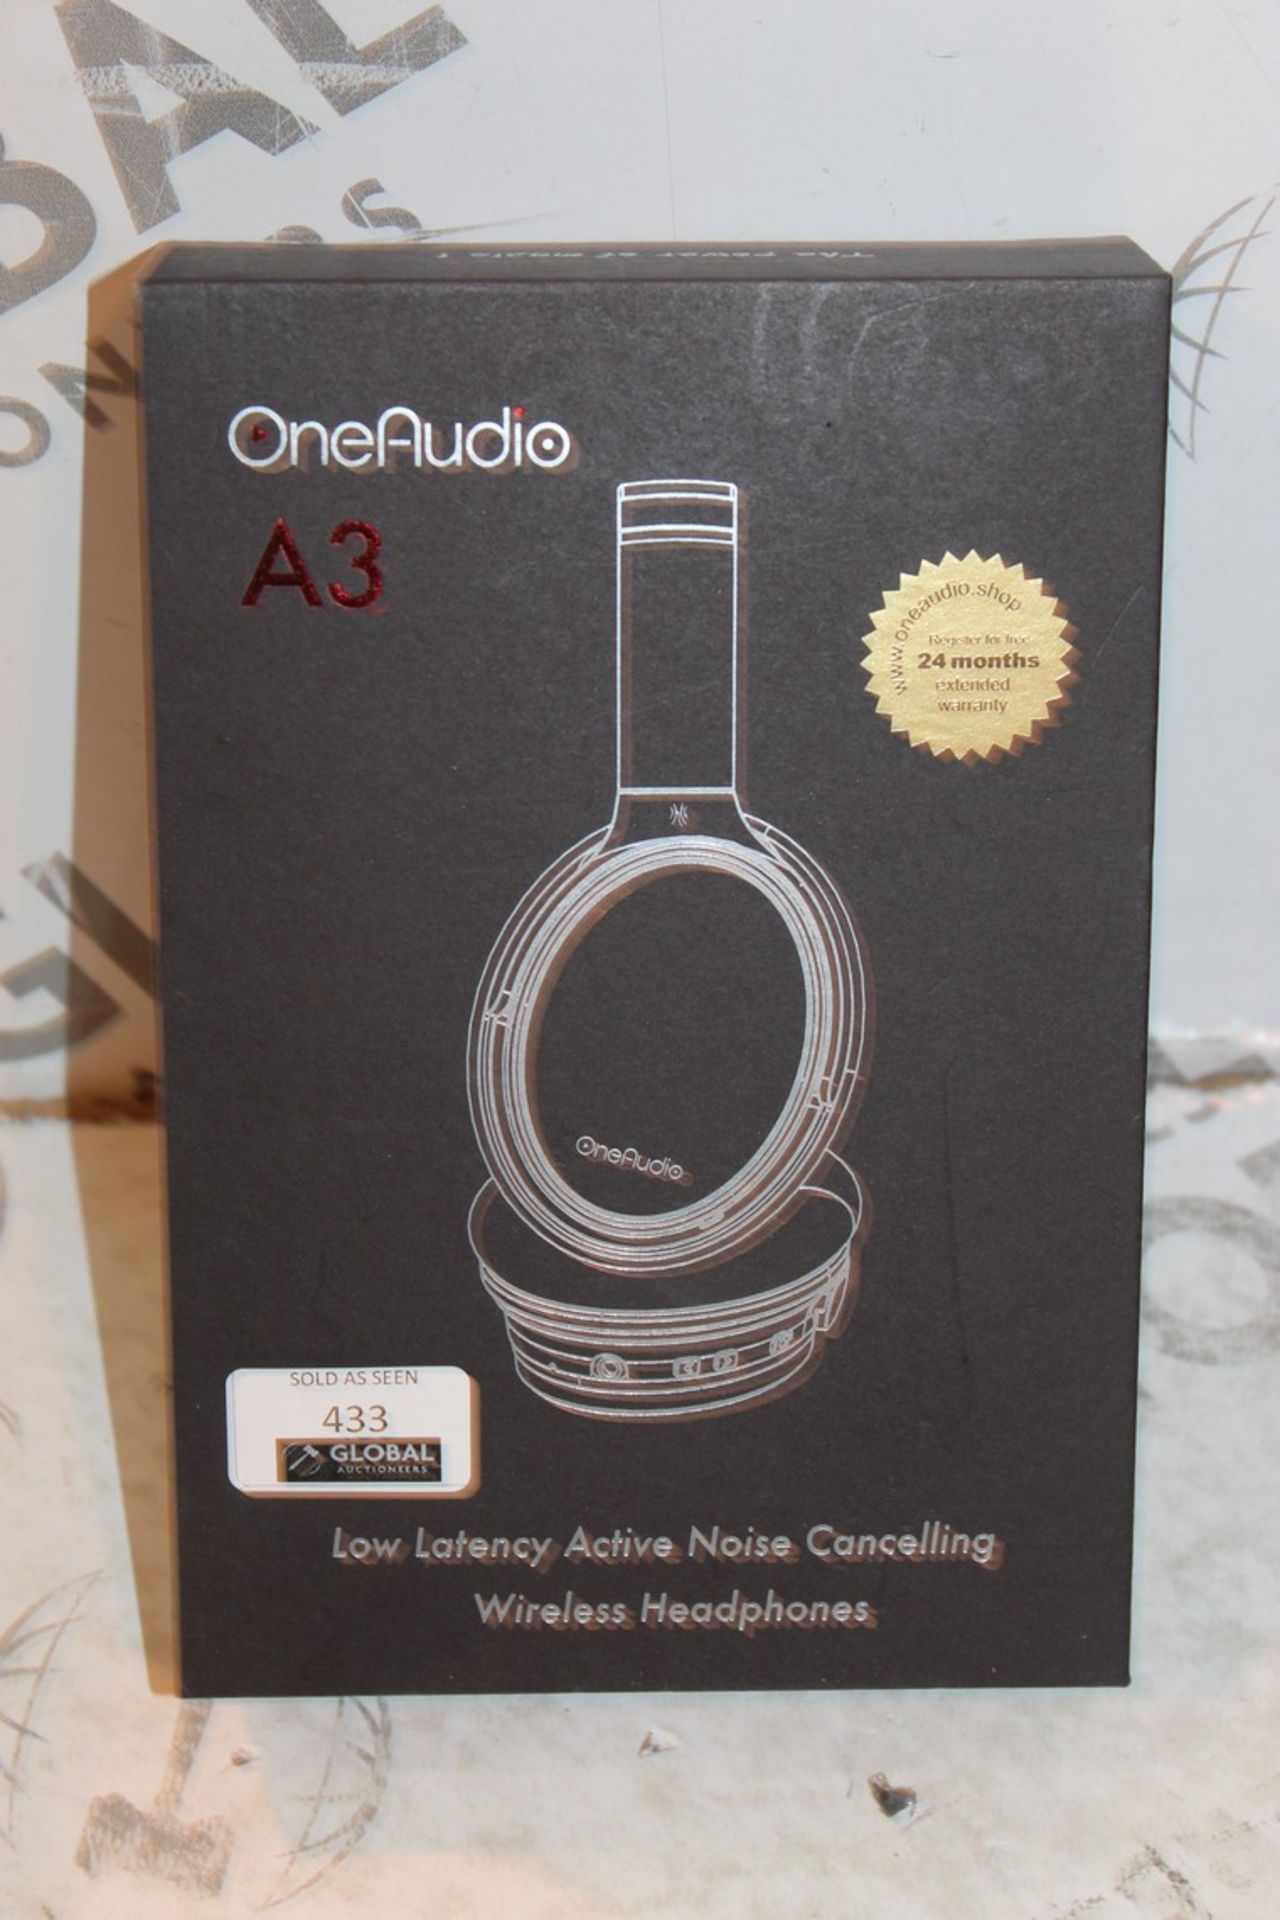 Boxed Pair One Audio A3 Low Latency Active Noise Cancelling Wireless Headphones RRP £55 (Pictures